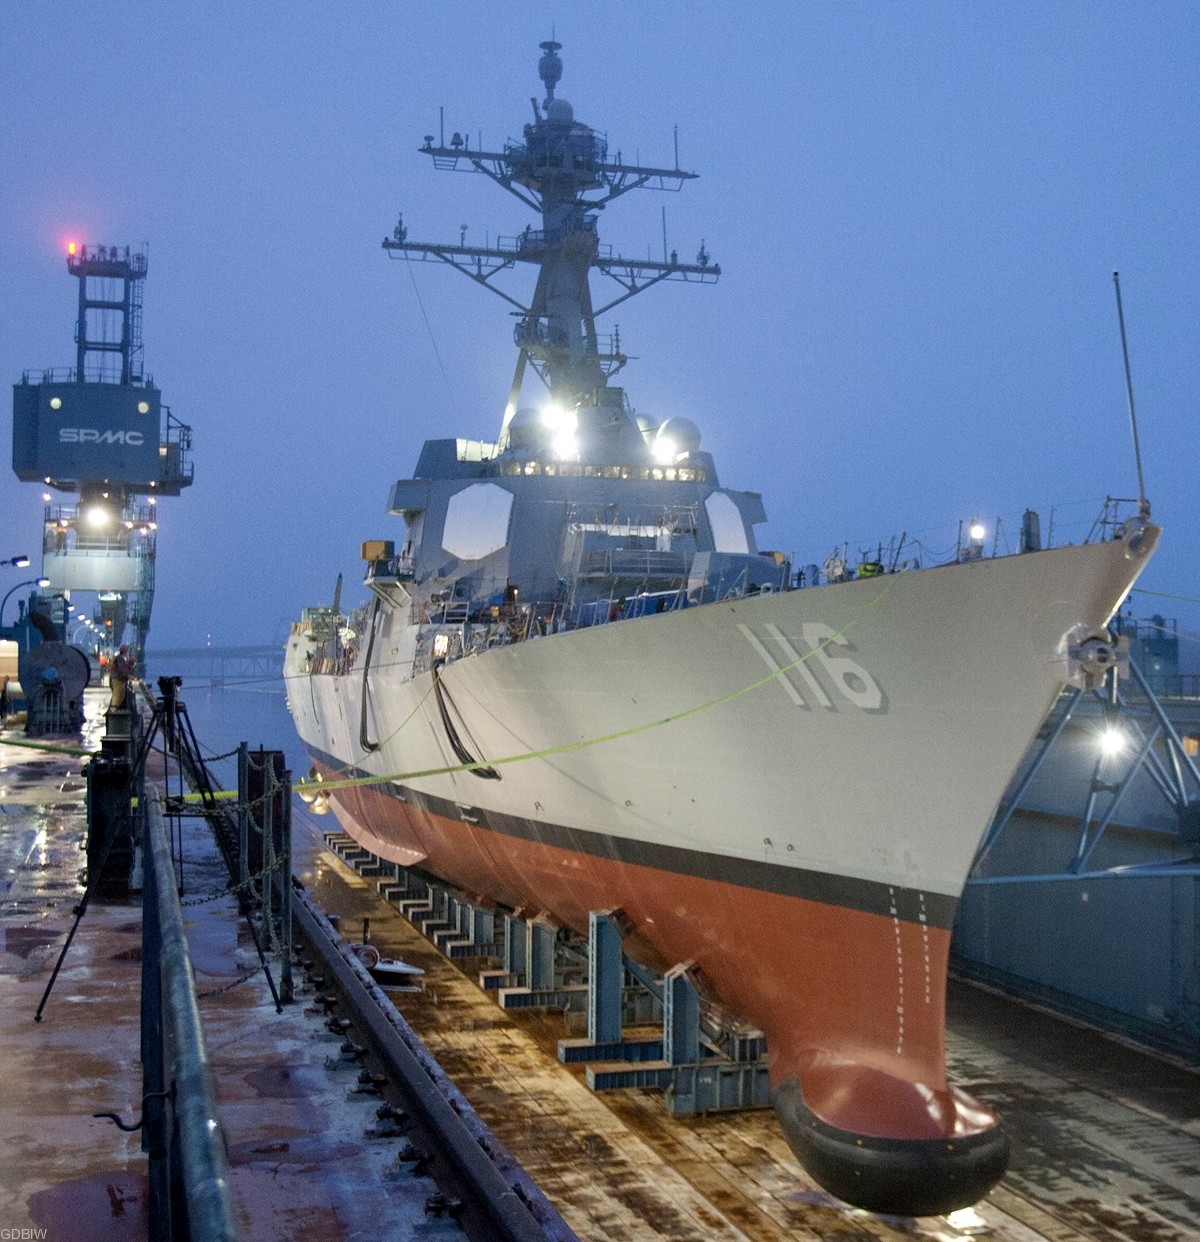 ddg-116 uss thomas hudner arleigh burke class guided missile destroyer us navy aegis 17a floating dry dock